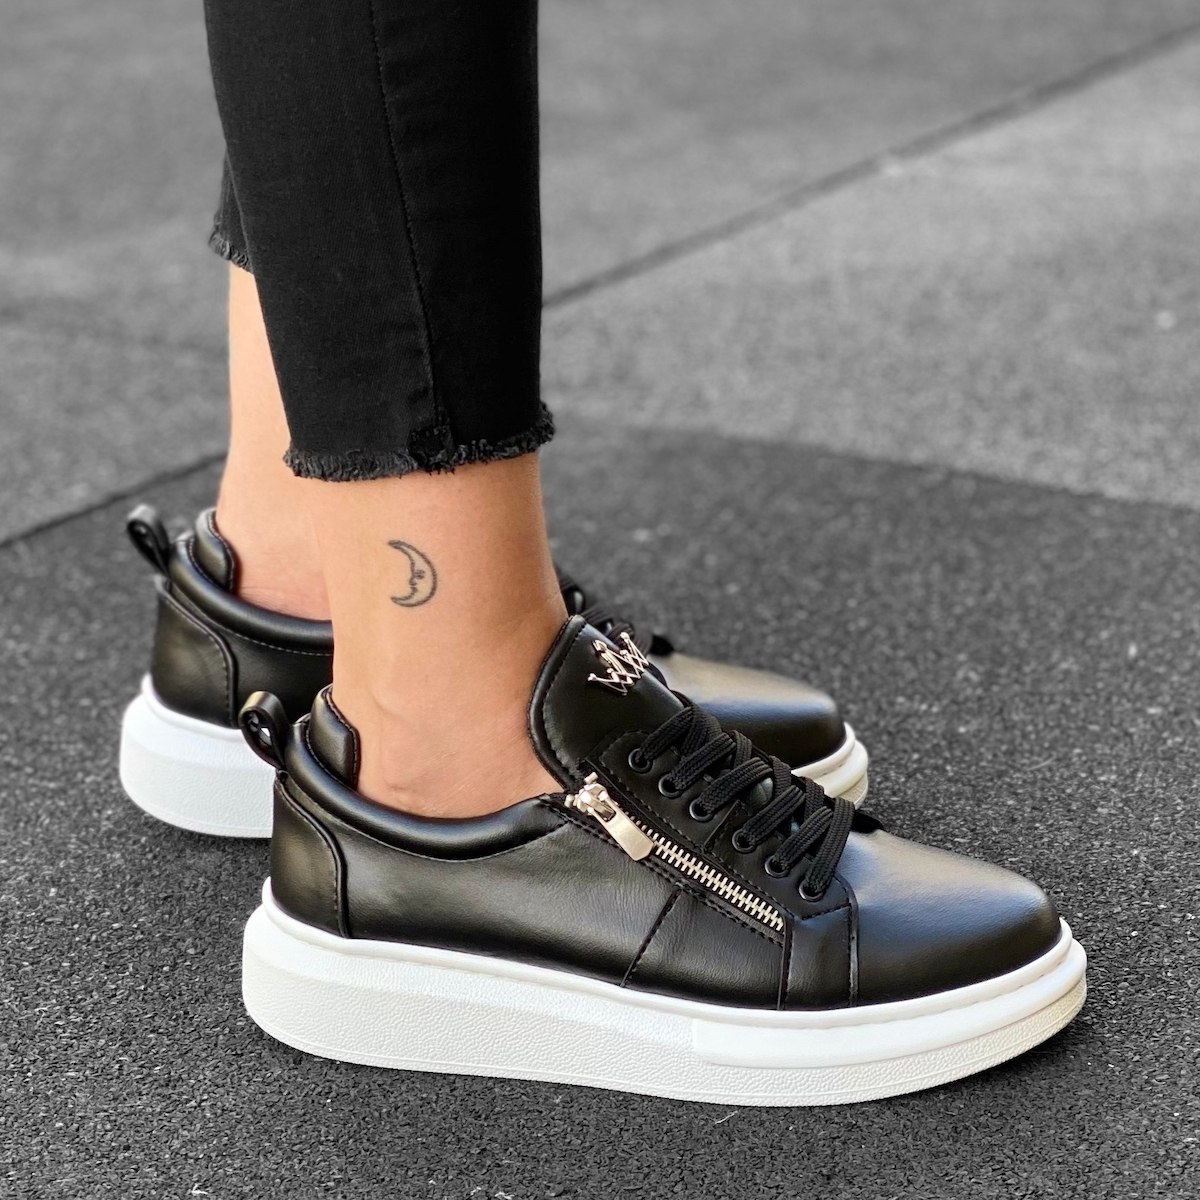 Woman's Zipped Style Sneakers in Black-White